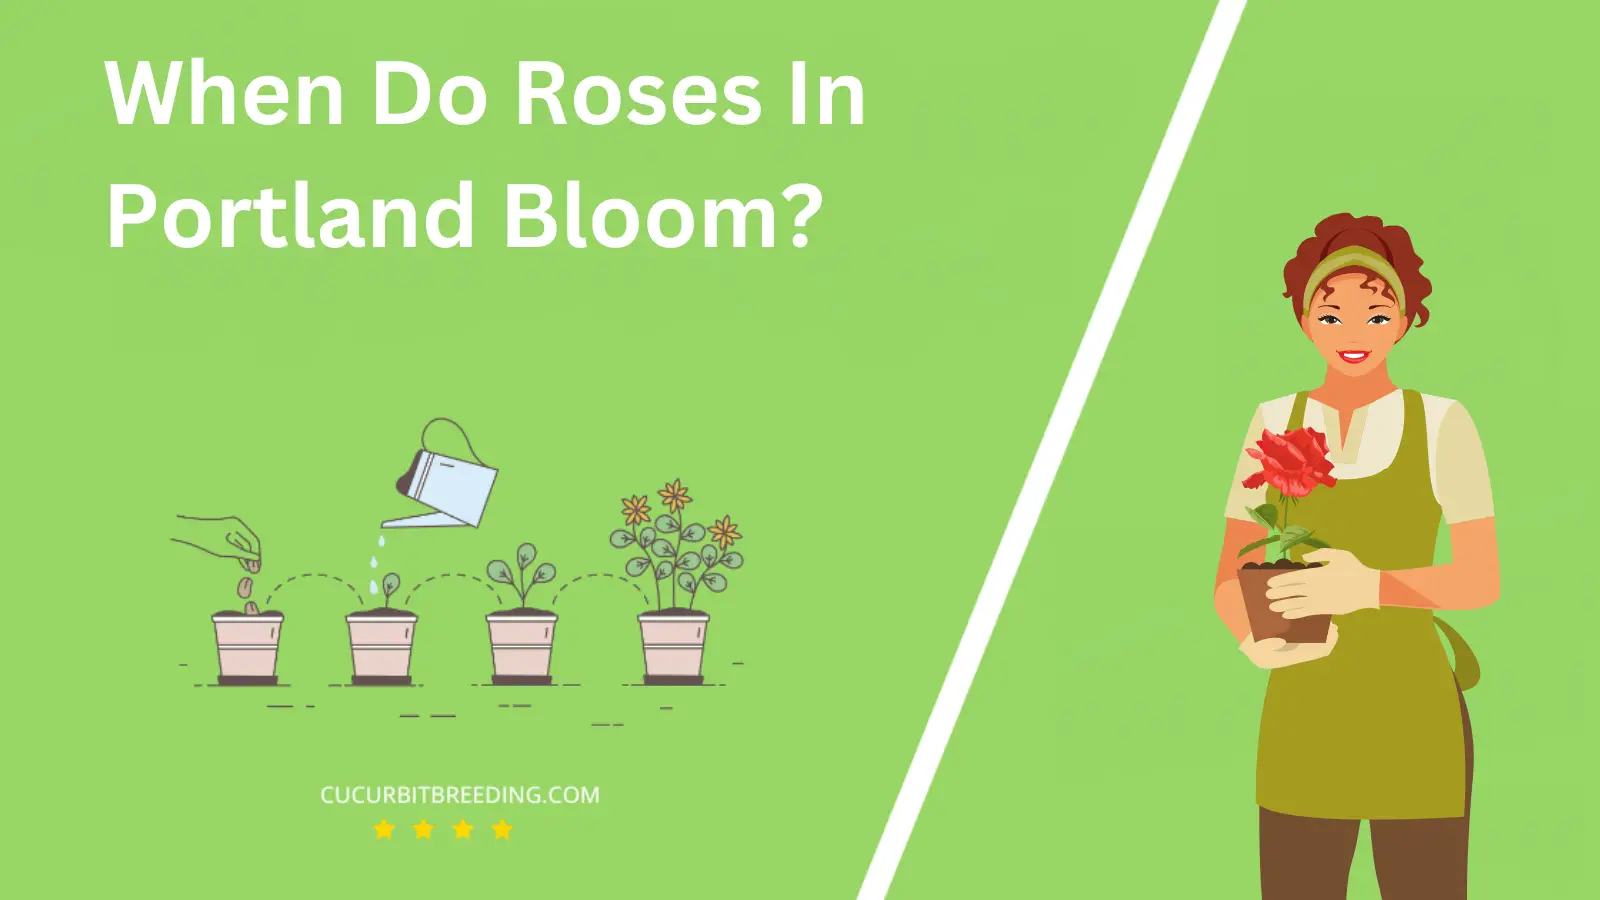 When Do Roses In Portland Bloom?